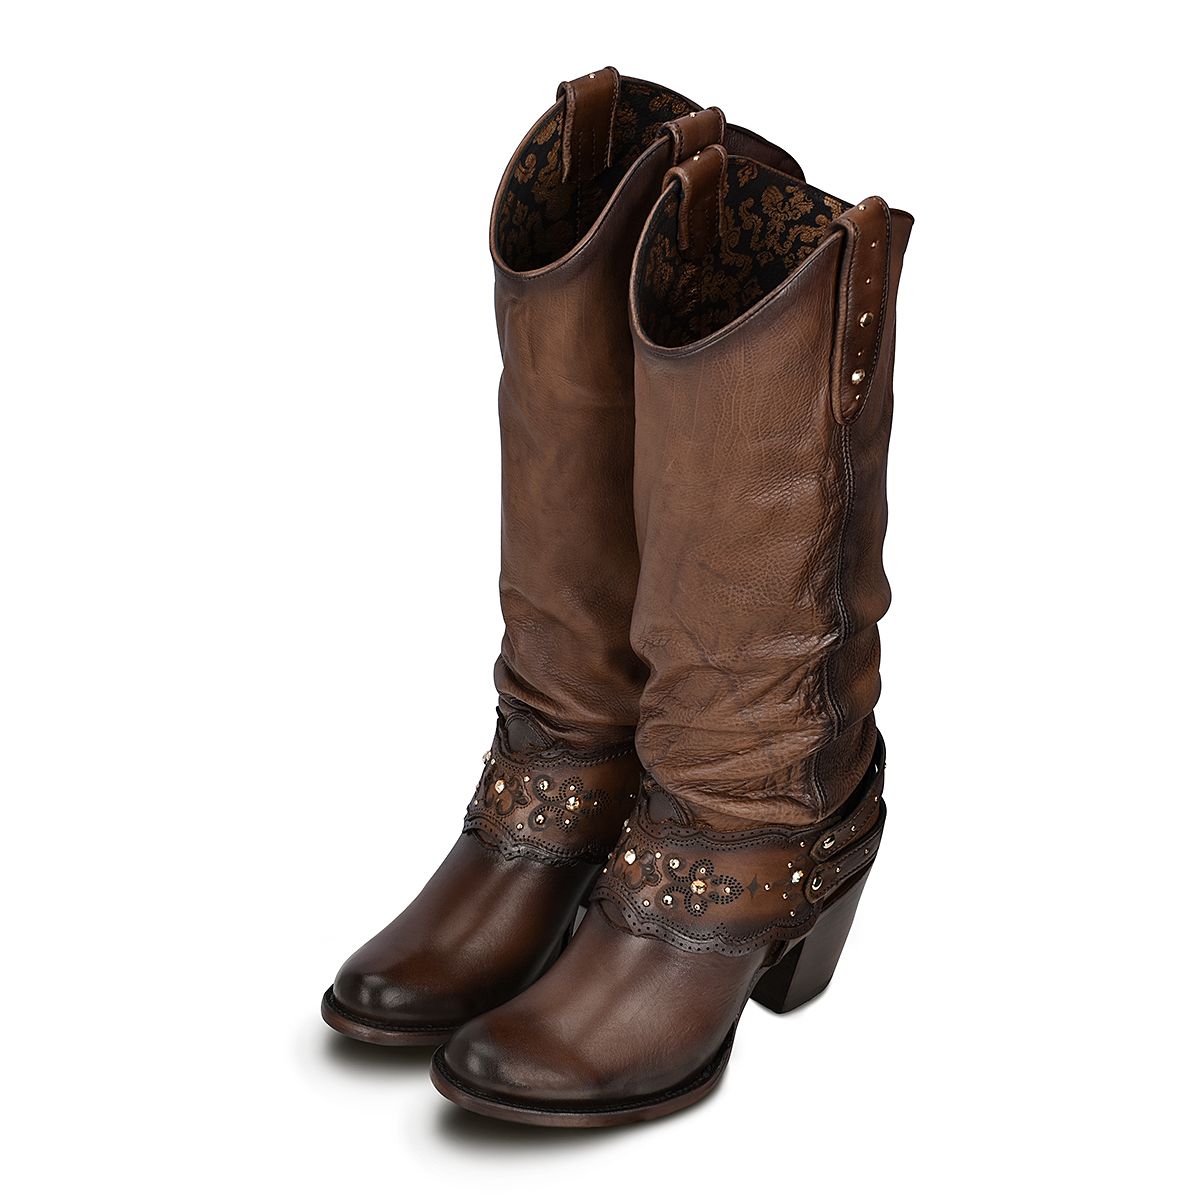 1Z41RS - Cuadra dark brown casual cowgirl leather knee high boots for women-Kuet.us